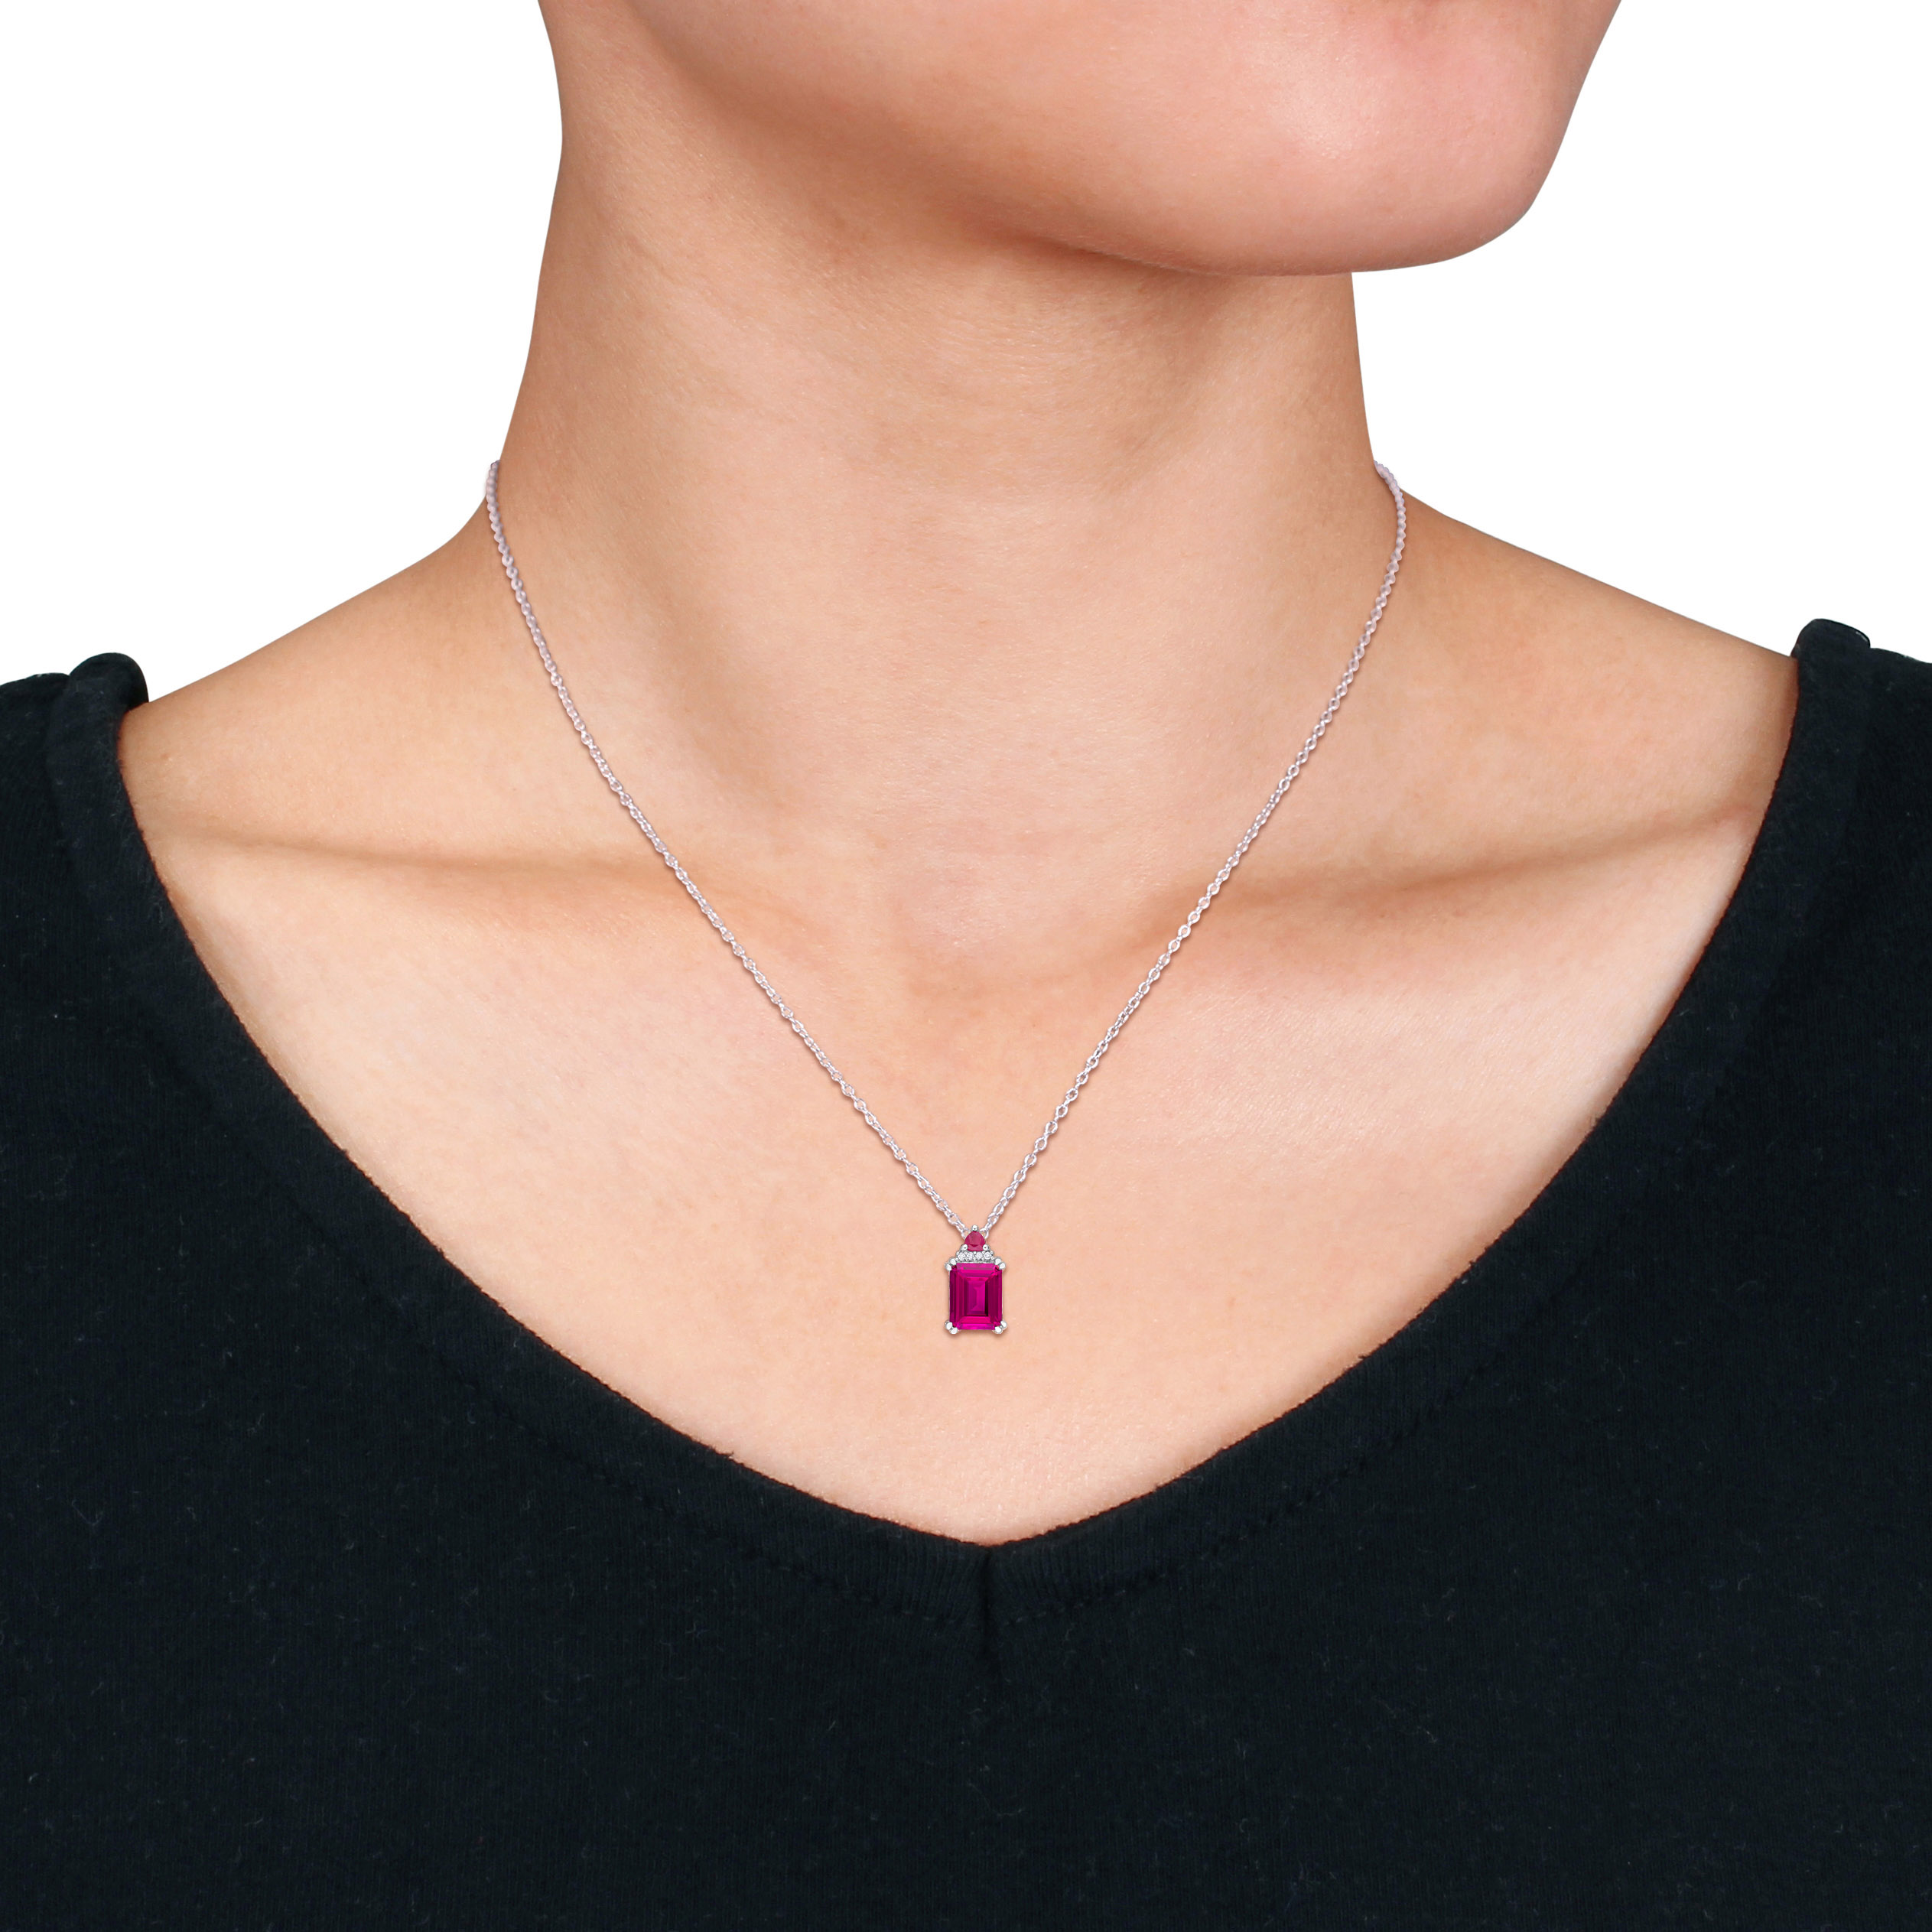 3 1/6 CT TGW Octagon Pink Topaz Trilliant Ruby and Diamond Accent Necklace in Sterling Silver